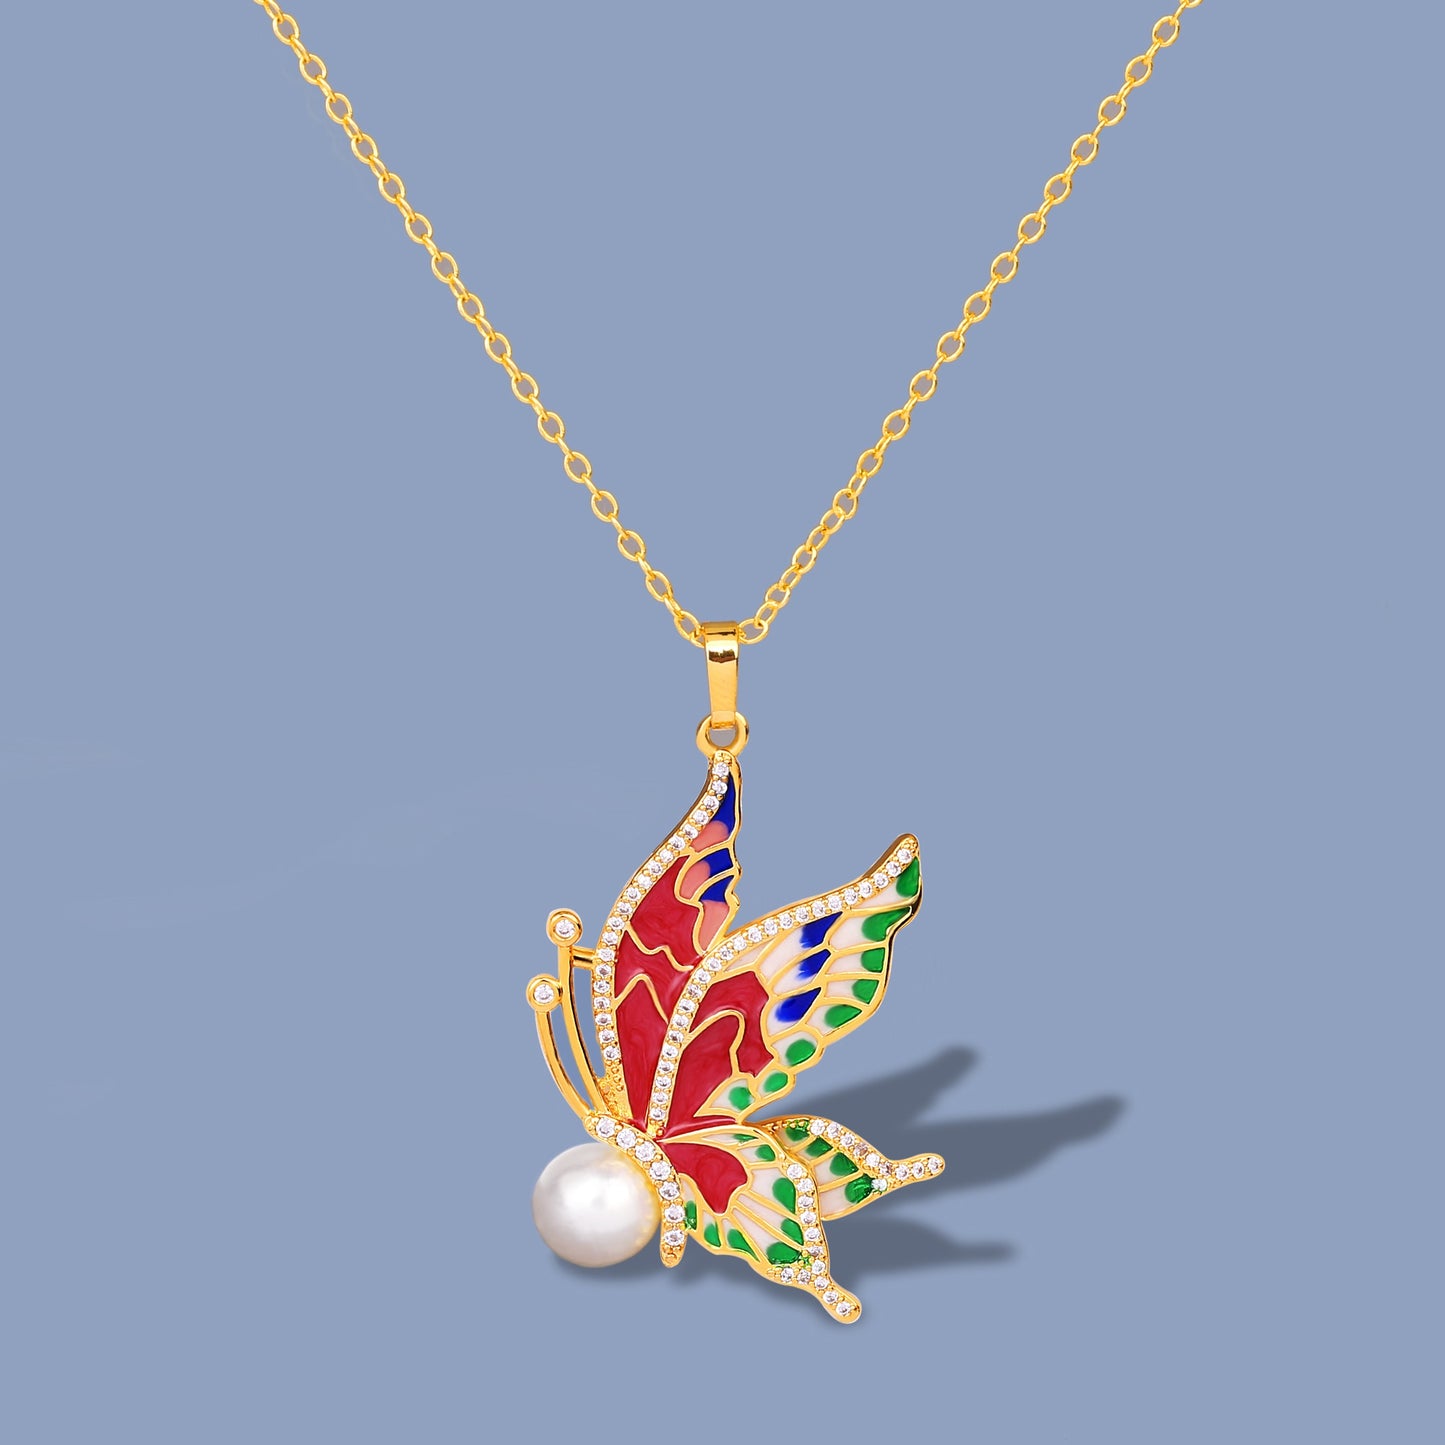 Handmade Enamel Butterfly Pendant Necklace for Women with Pearl in 925 Silver